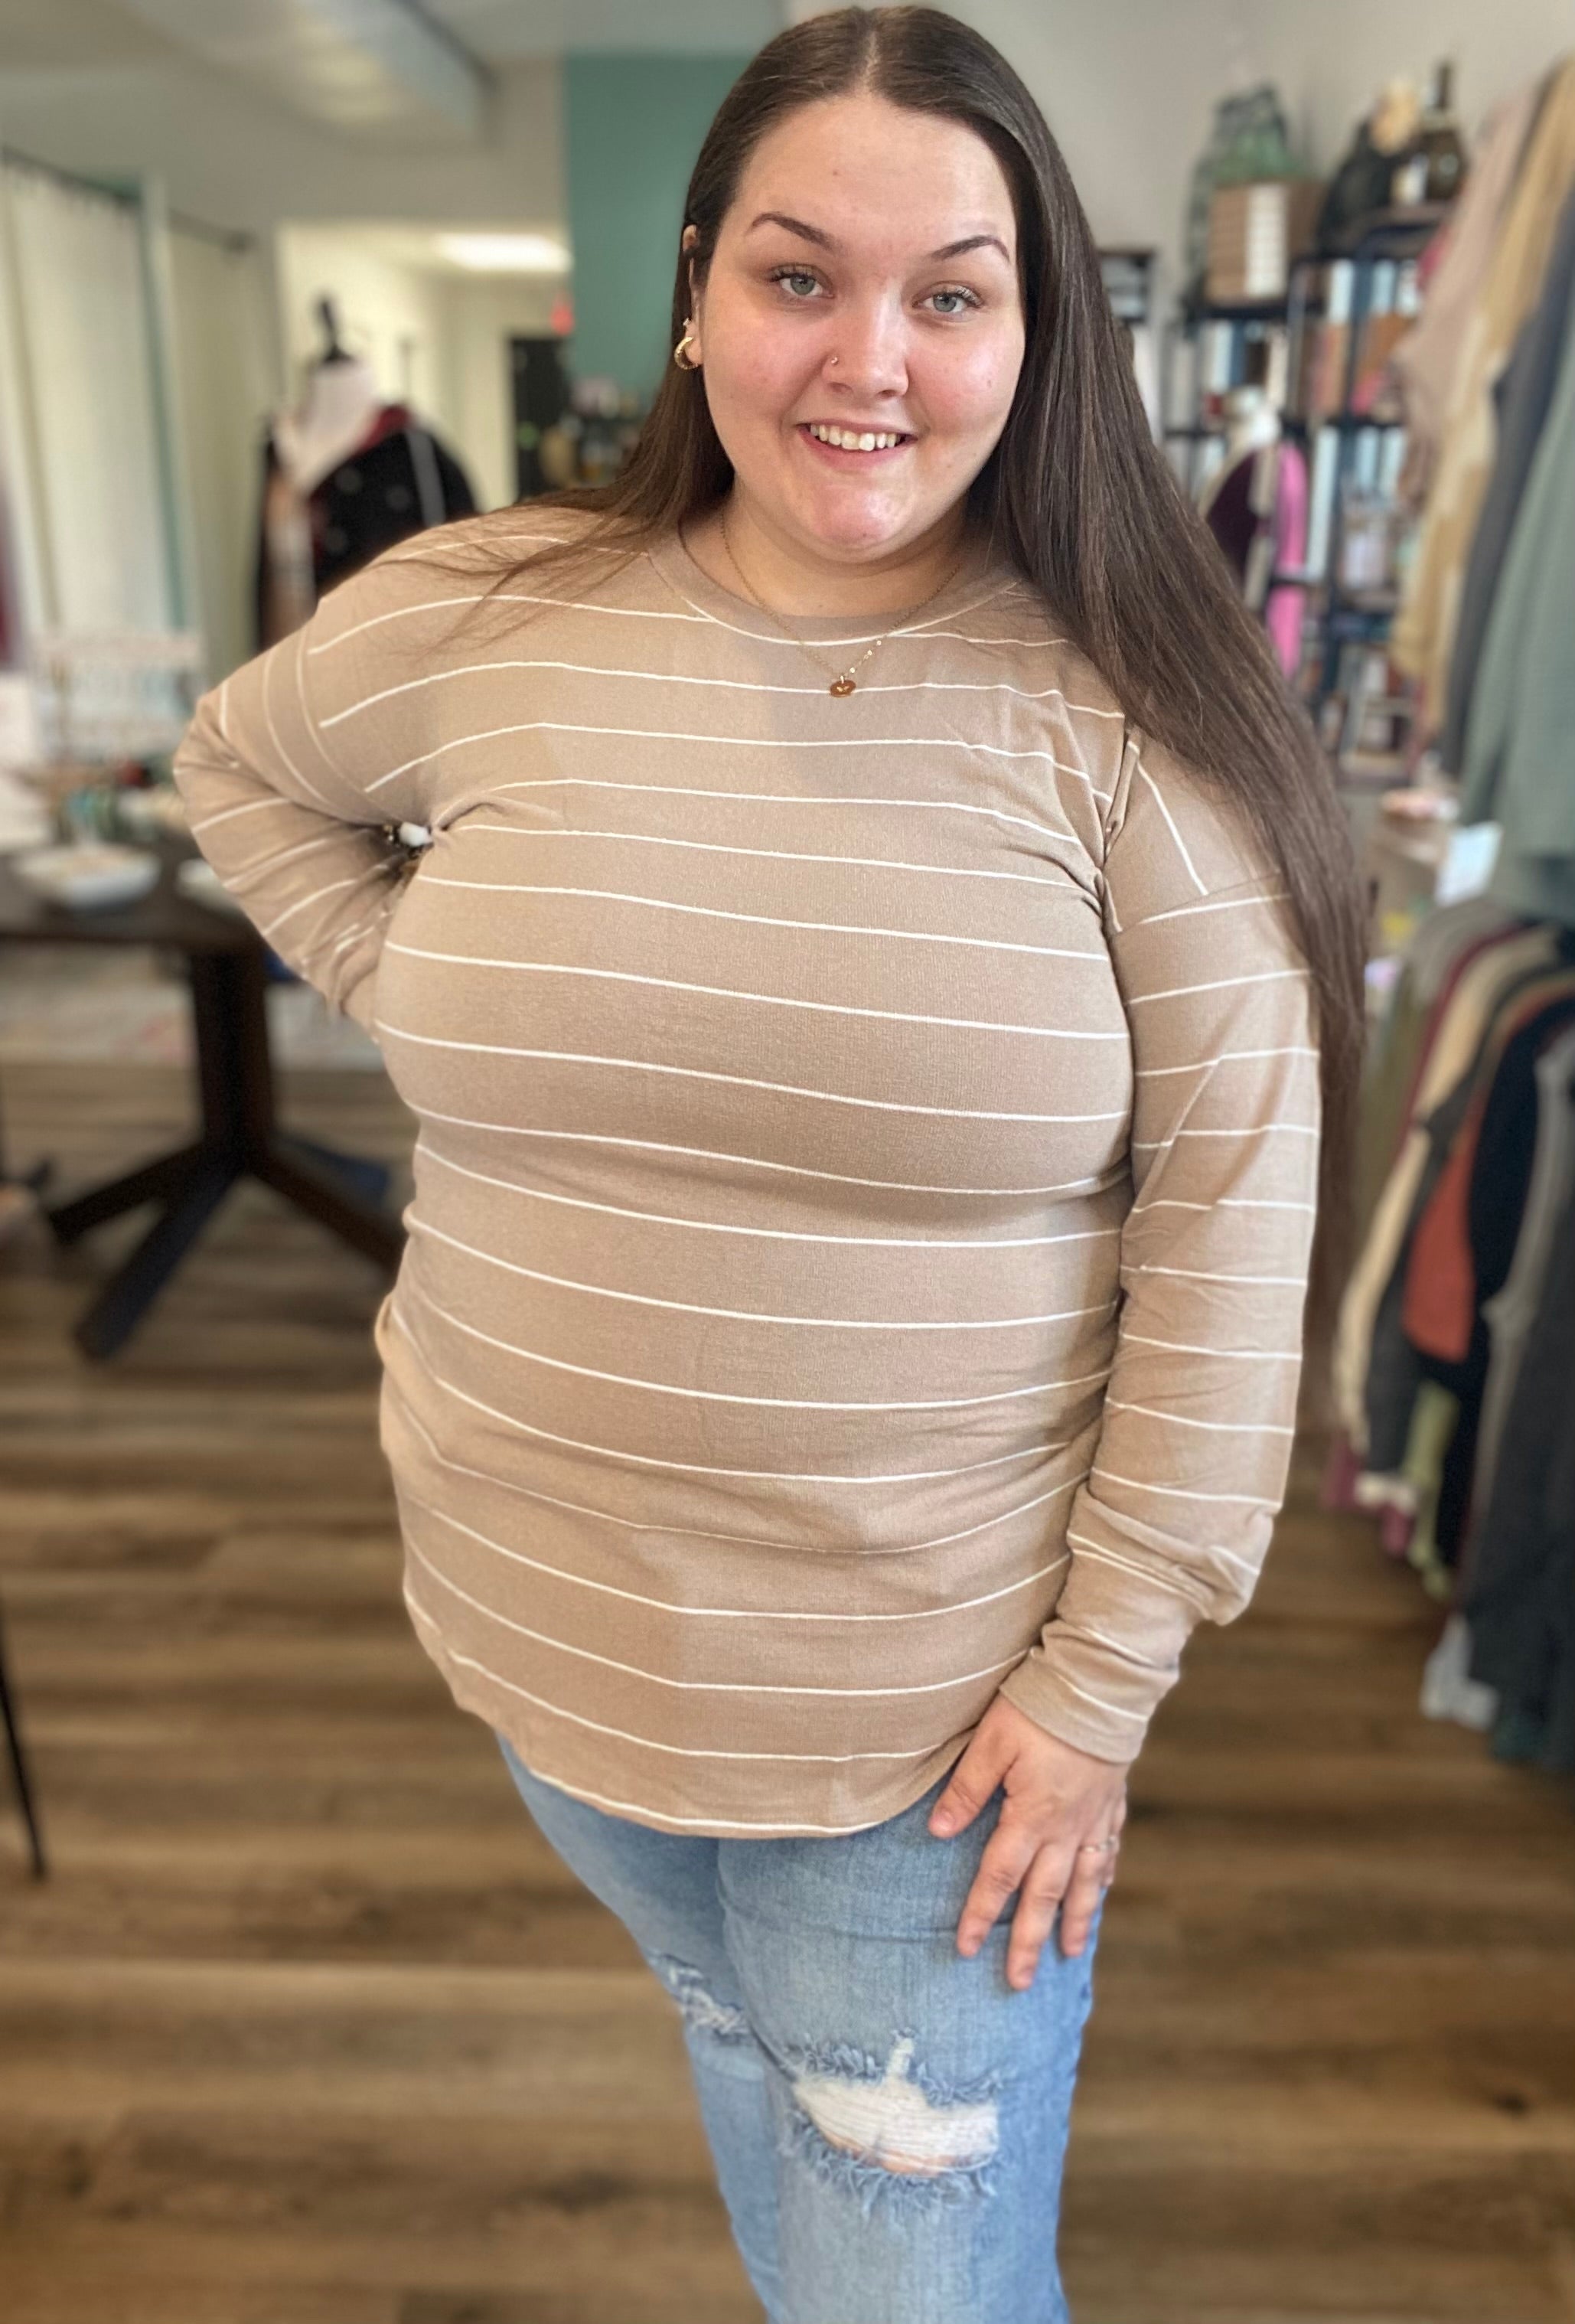 Shop Sarah Striped Top-Shirts & Tops at Ruby Joy Boutique, a Women's Clothing Store in Pickerington, Ohio